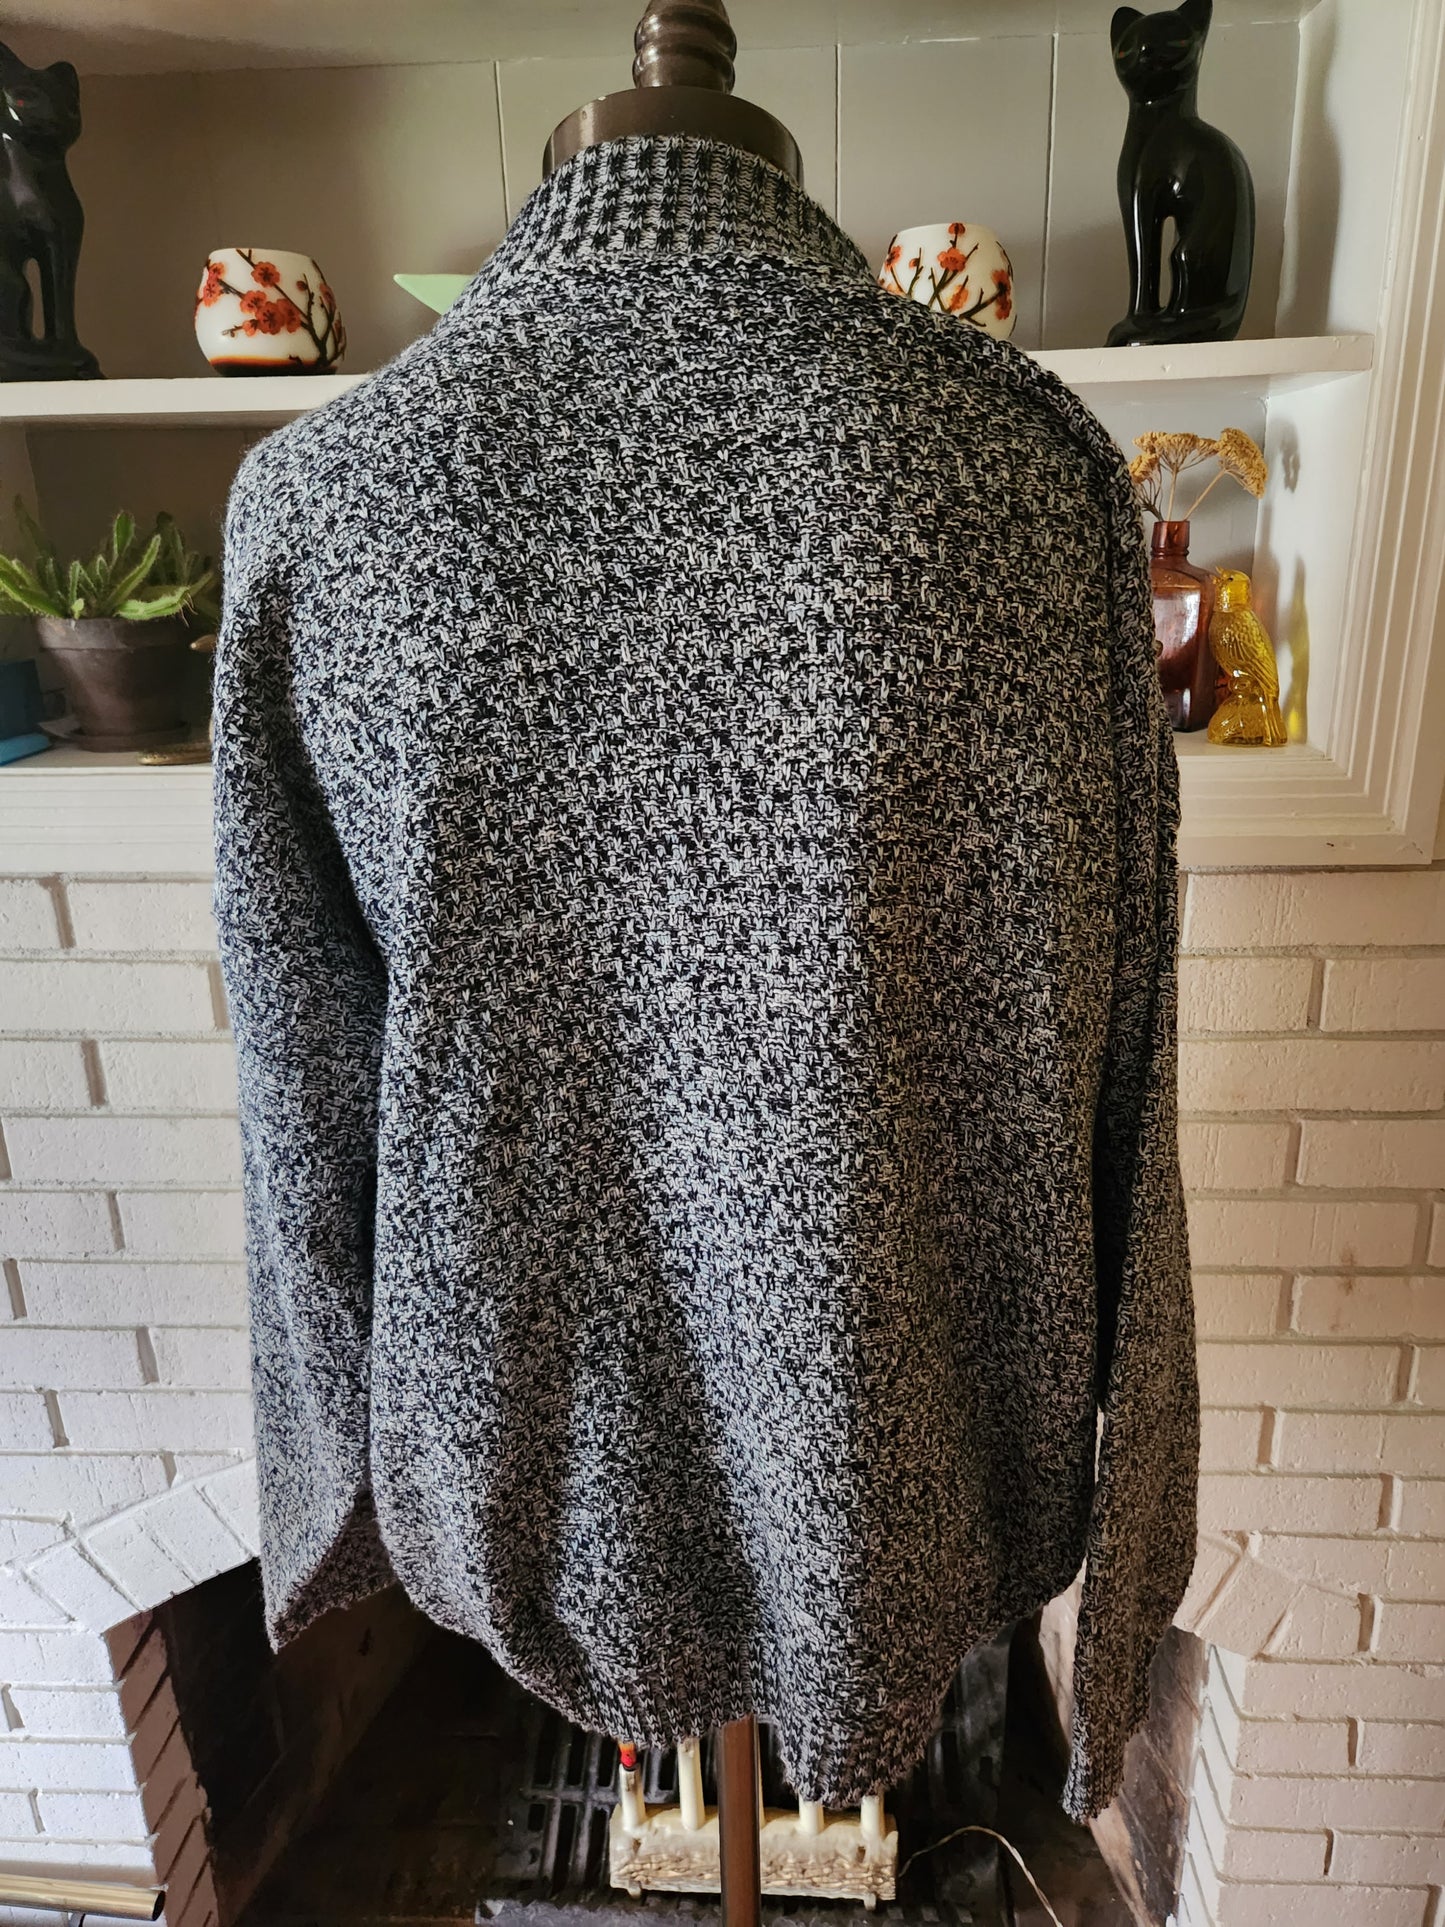 Vintage Black and White Sweater by Clifton Place